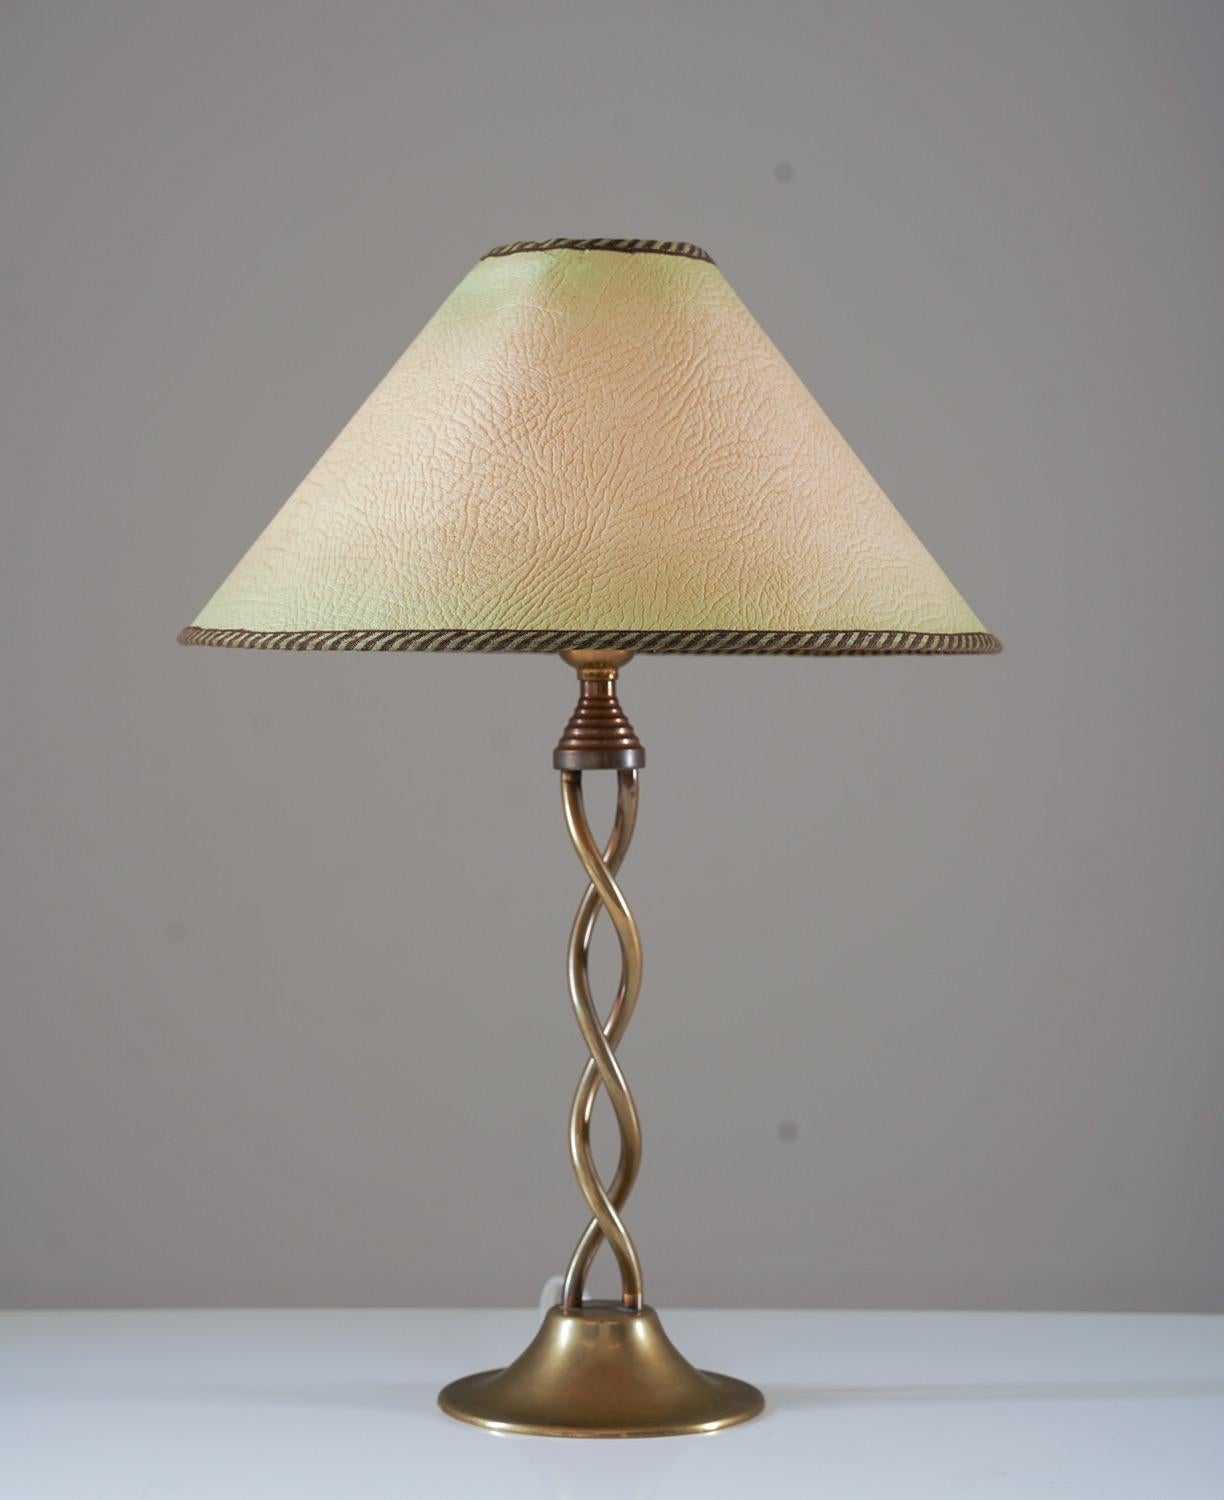 Swedish modern table lamp in brass, most likely produced in Sweden, 1930s.

Condition: Very good condition. The lamps come with a matching vintage shade from the same era.